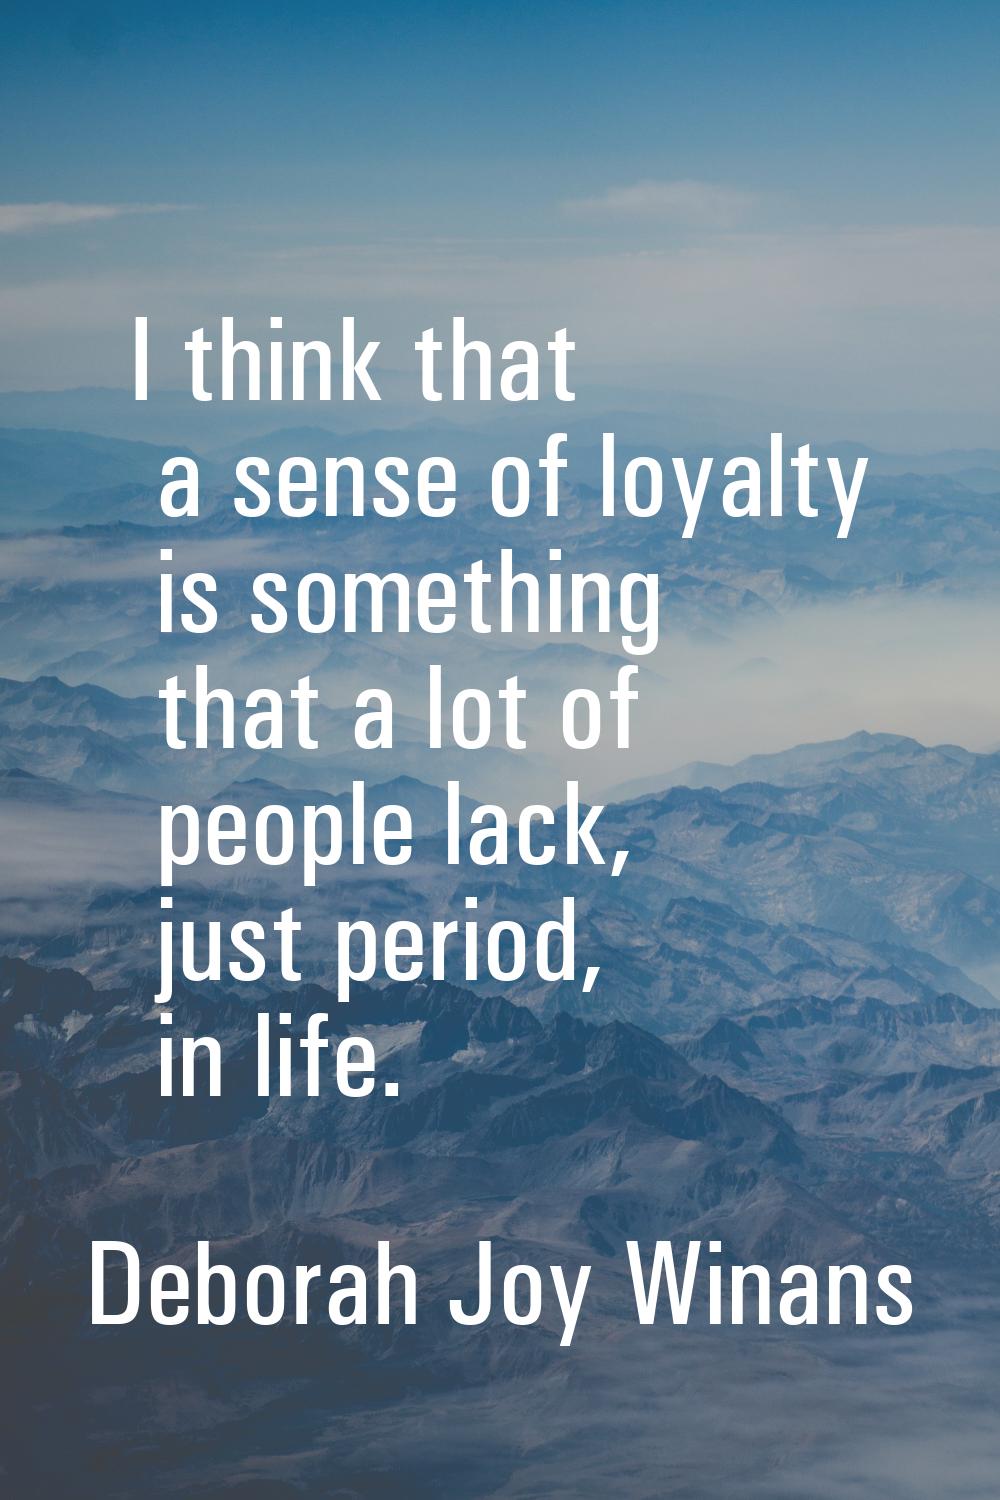 I think that a sense of loyalty is something that a lot of people lack, just period, in life.